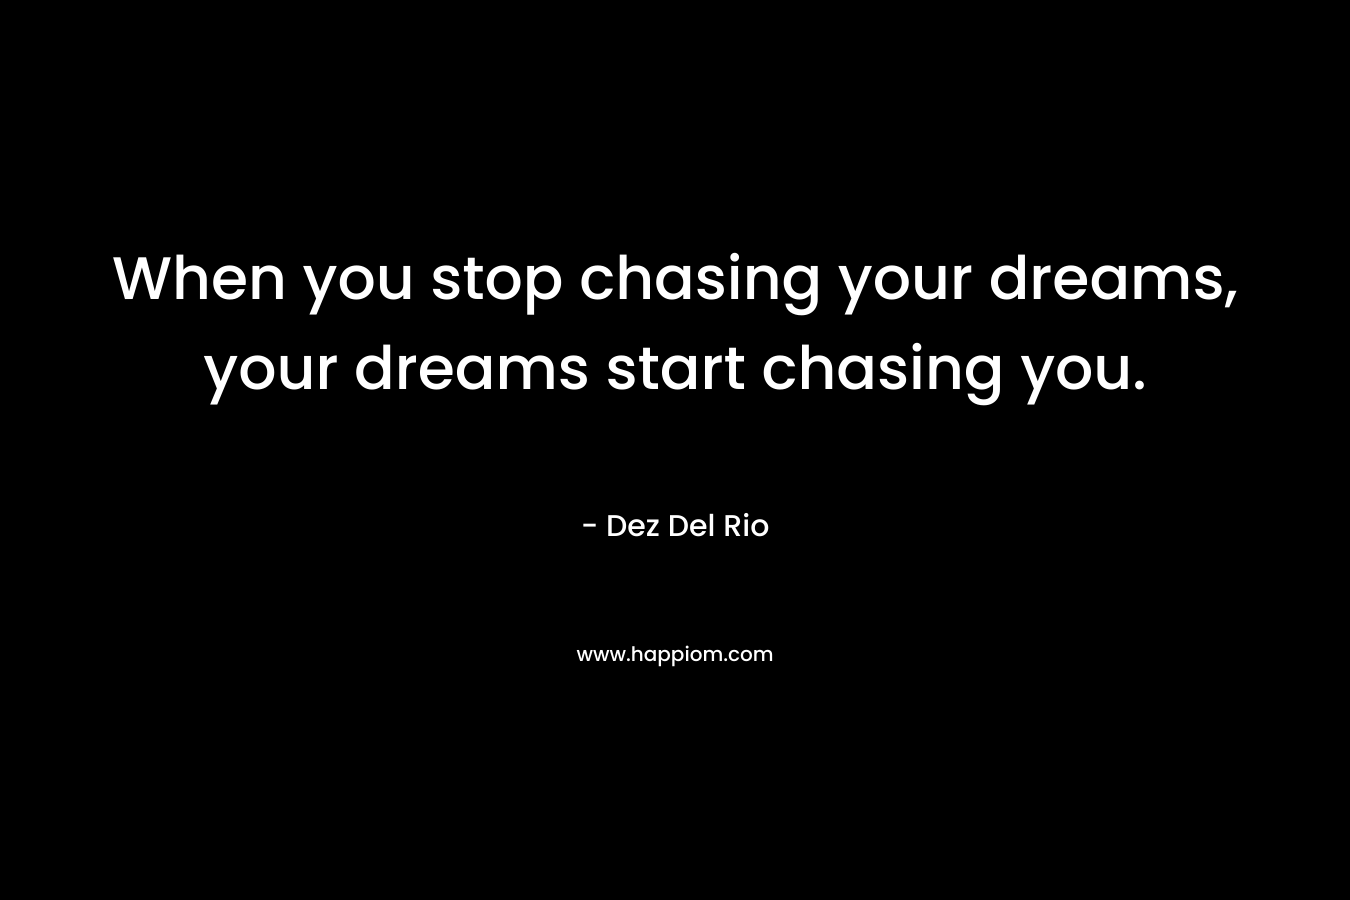 When you stop chasing your dreams, your dreams start chasing you. – Dez Del Rio